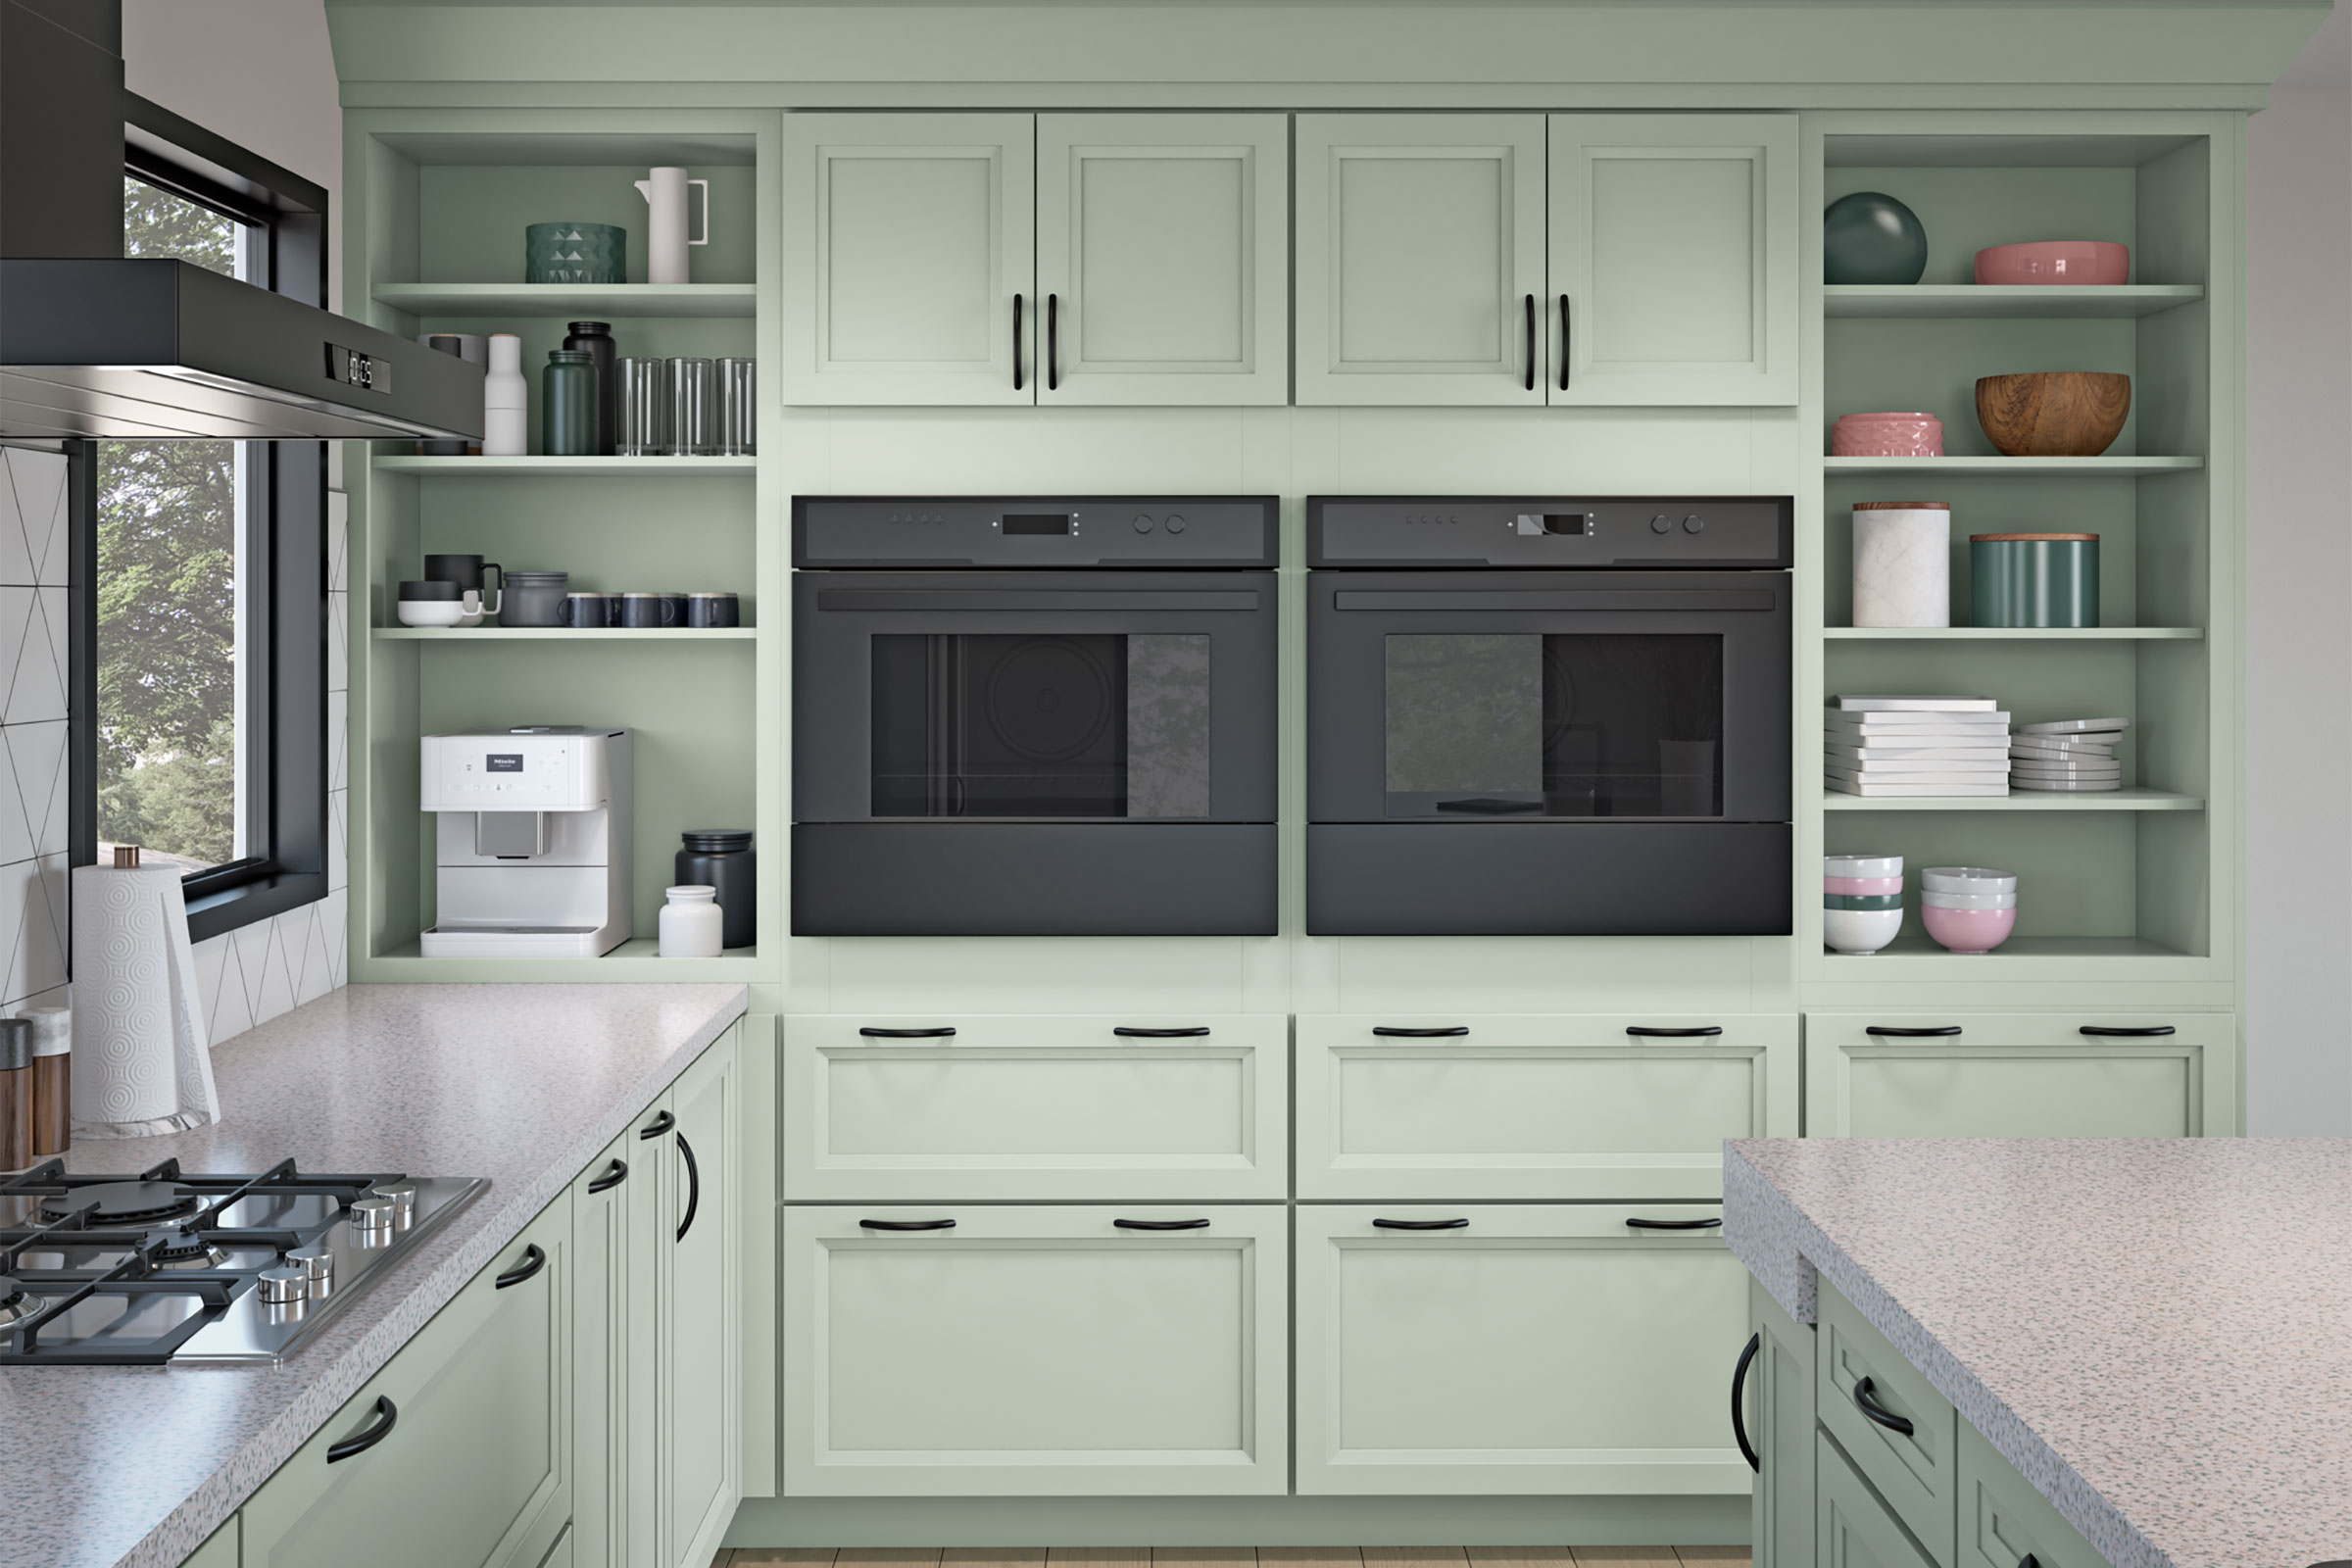 Choosing Cabinet Colors to Fit Your Appliances - KraftMaid